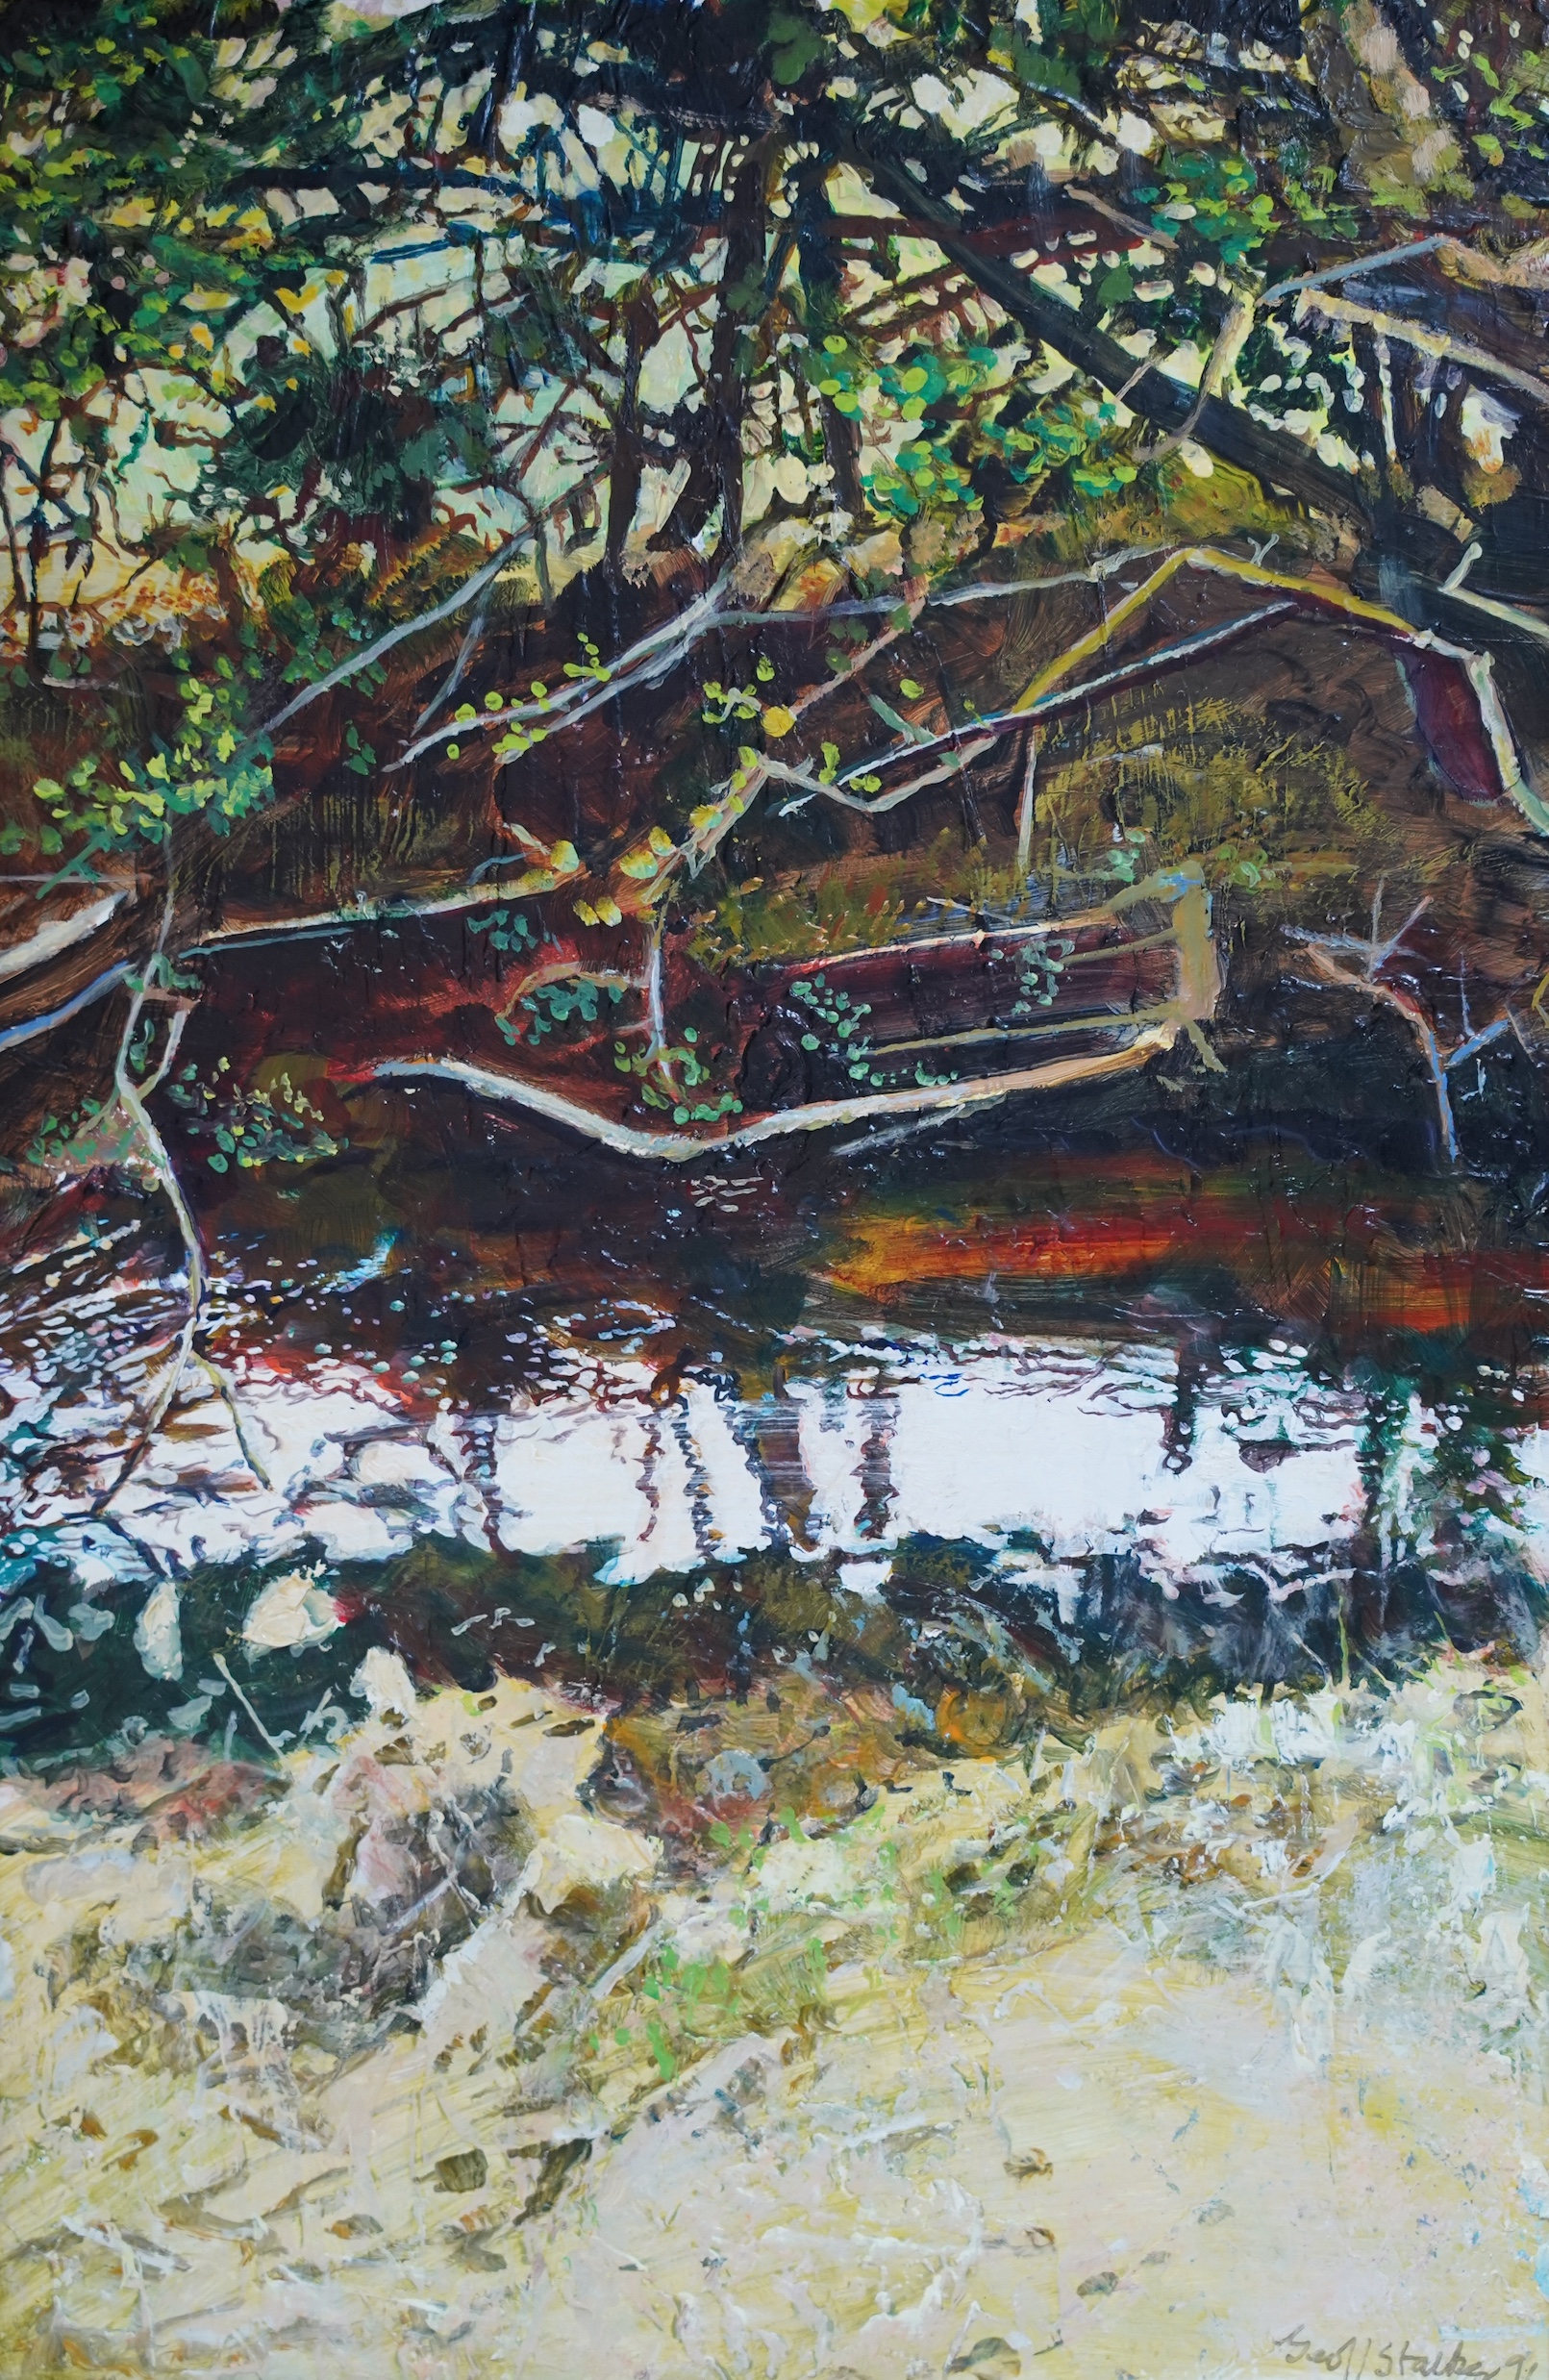 Geoff Stalker (b.1948), oil on board, Reflection of trees in a stream, signed and dated '96, 45 x 29cm